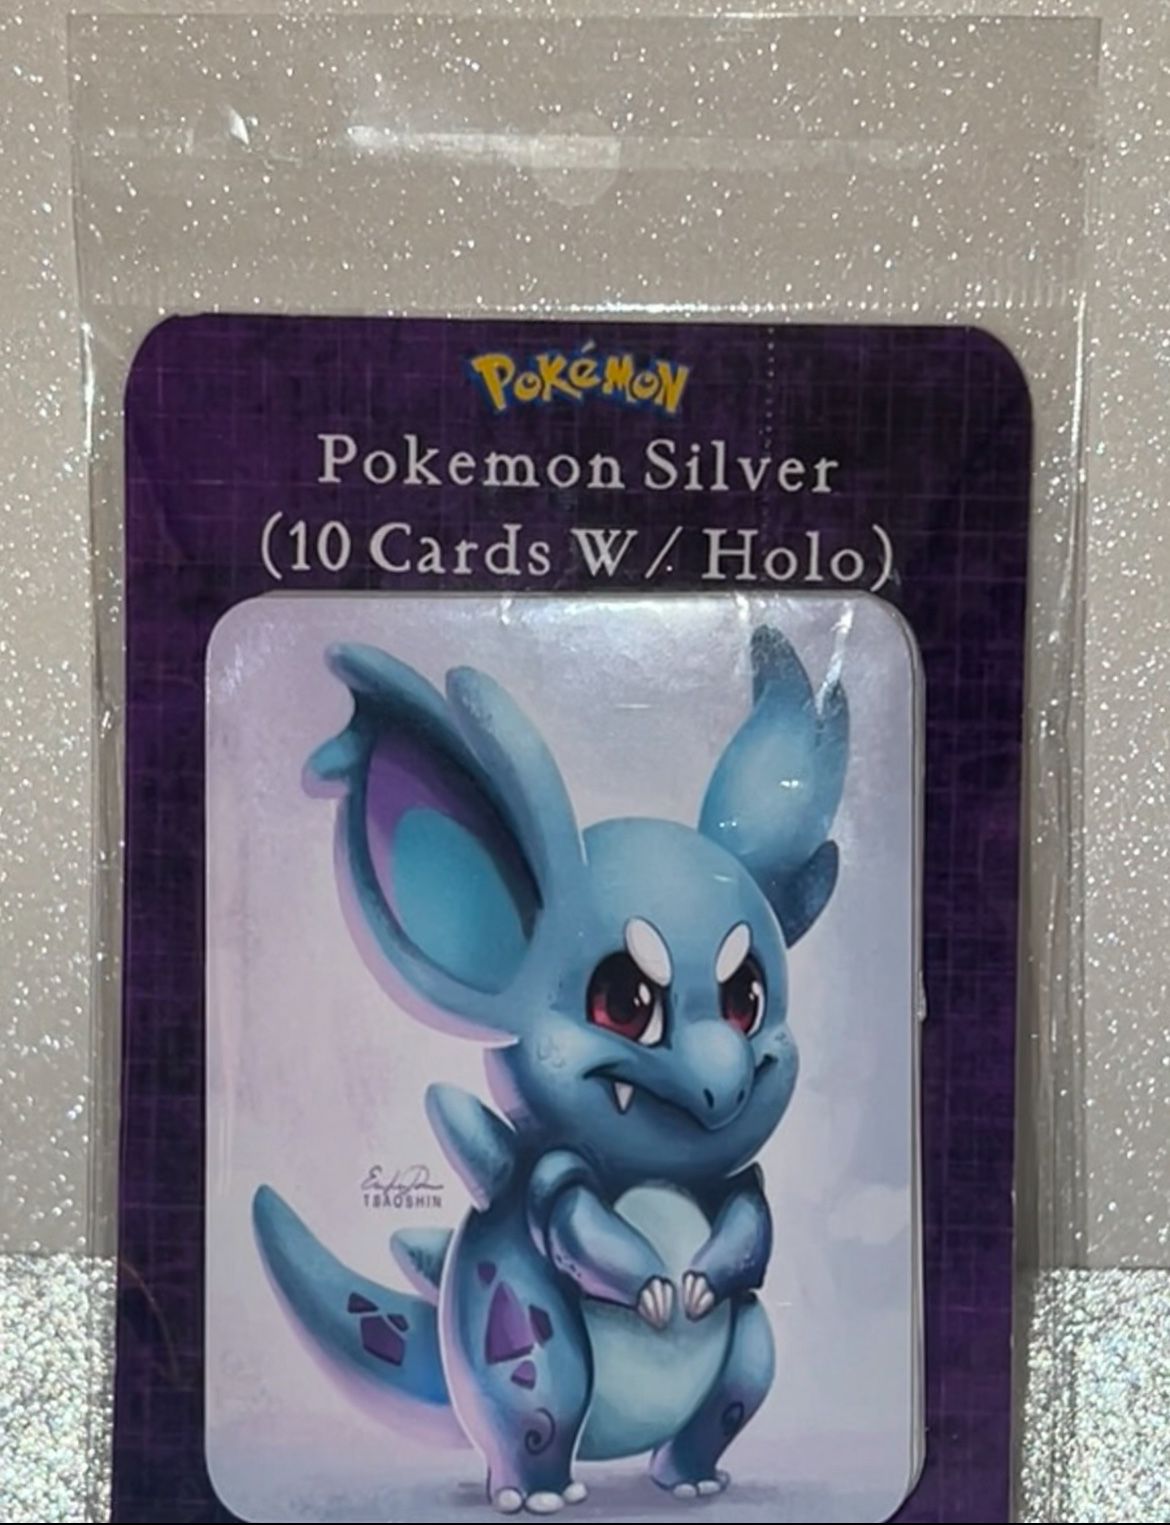 Brand new Pokemon cards. 10 cards with 1 holo. Ultra Rare 